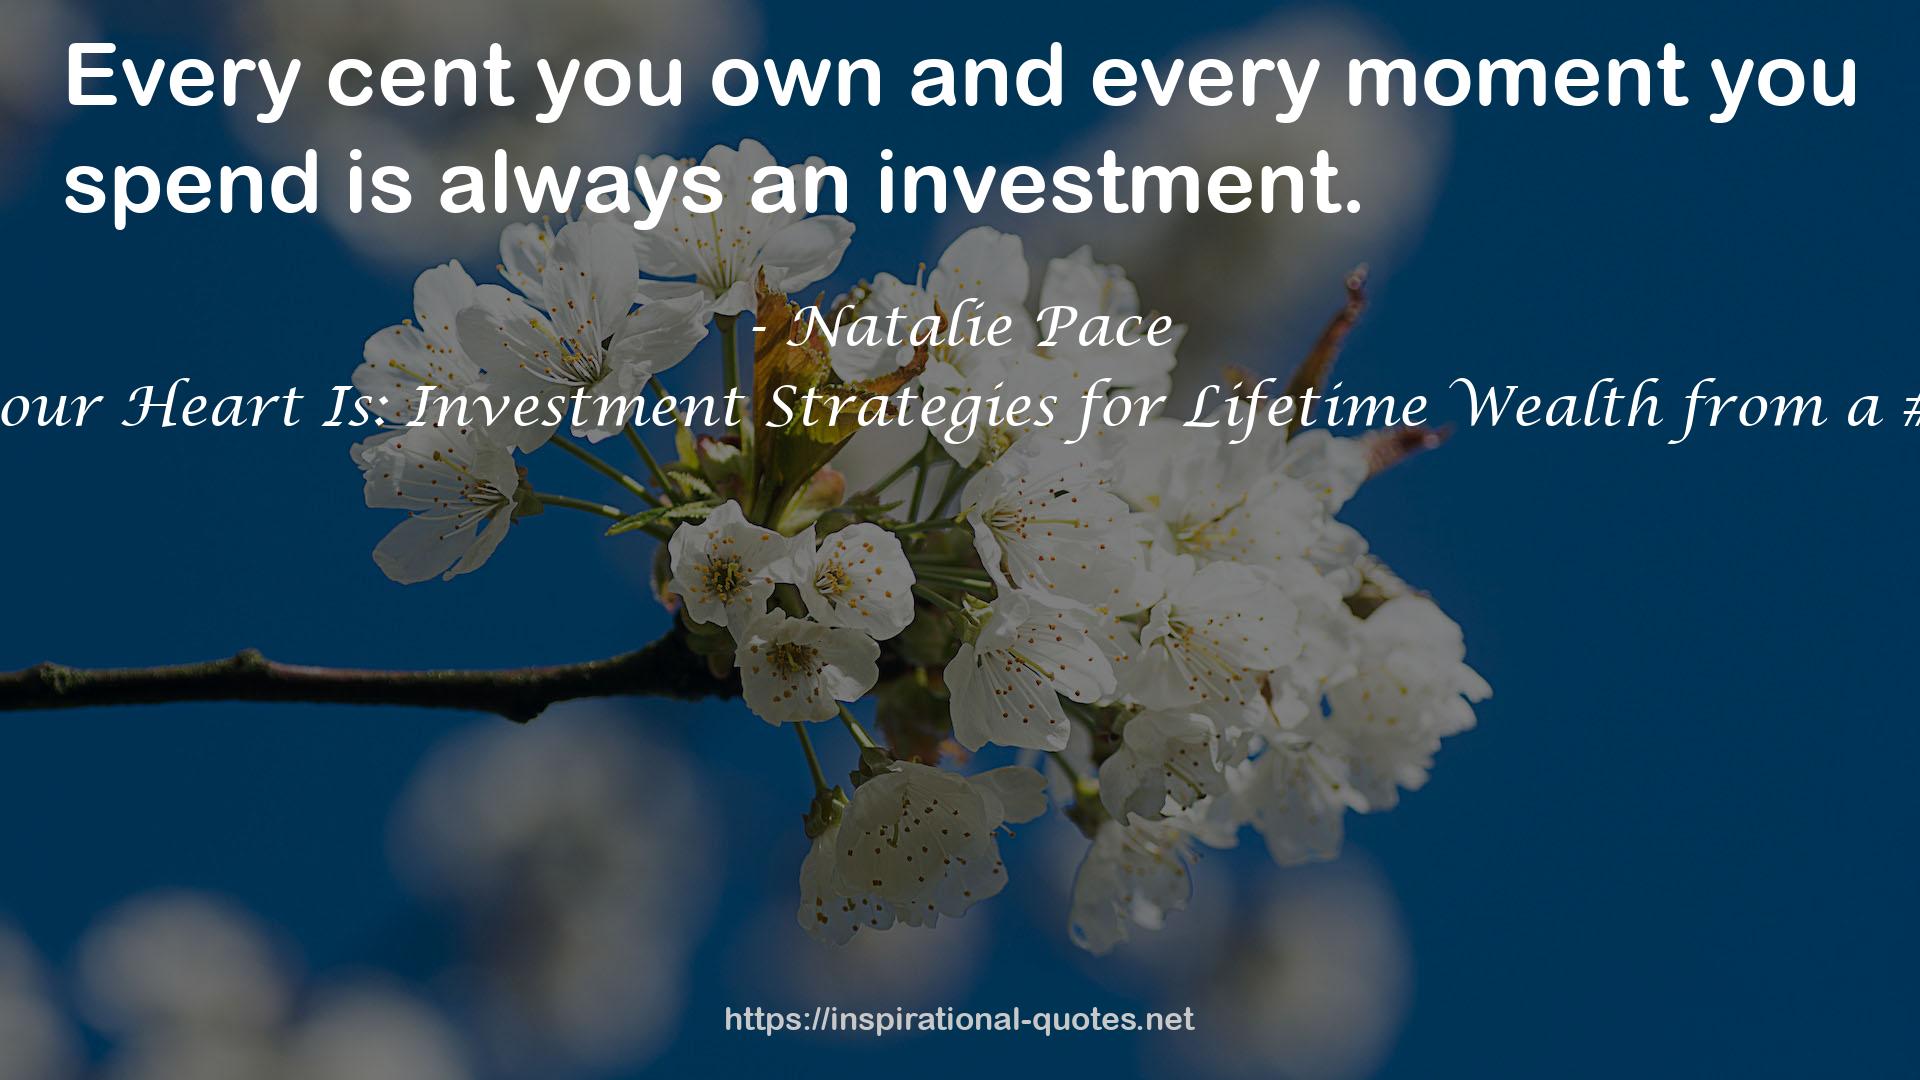 Put Your Money Where Your Heart Is: Investment Strategies for Lifetime Wealth from a #1 Wall Street Stock Picker QUOTES